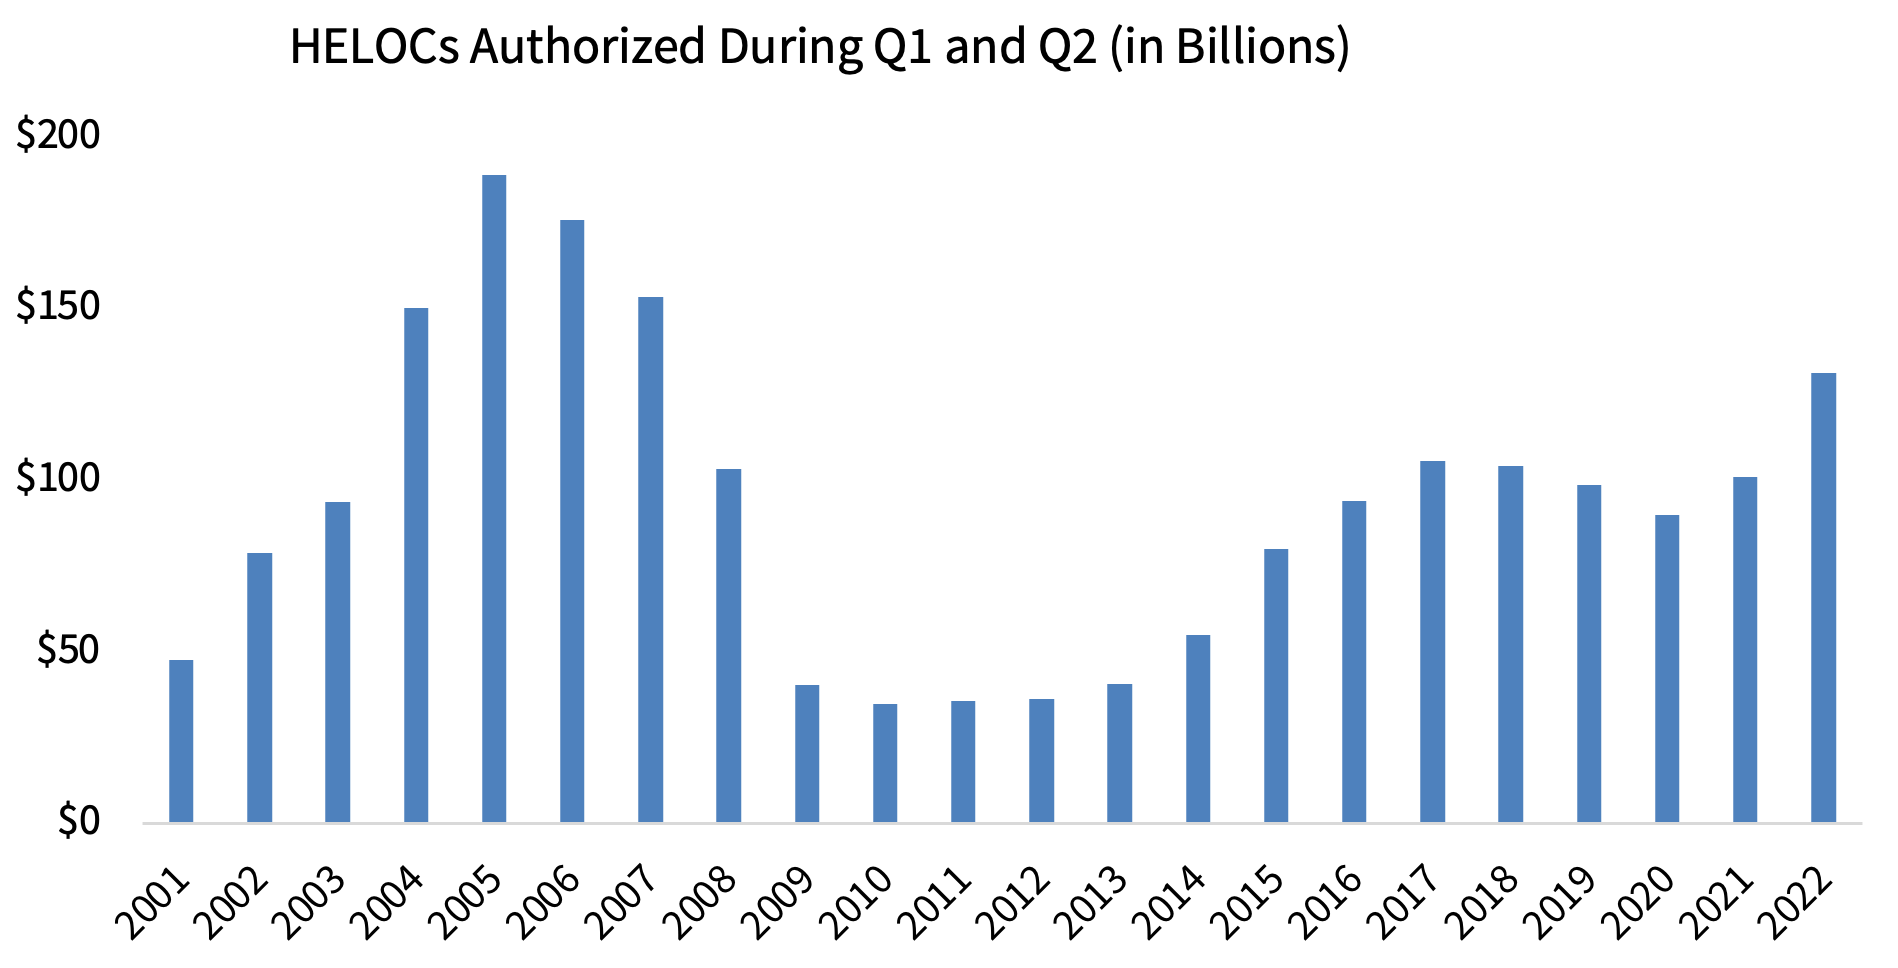 Figure 1: HELOC Activity Grew to the Highest Level Since 2007